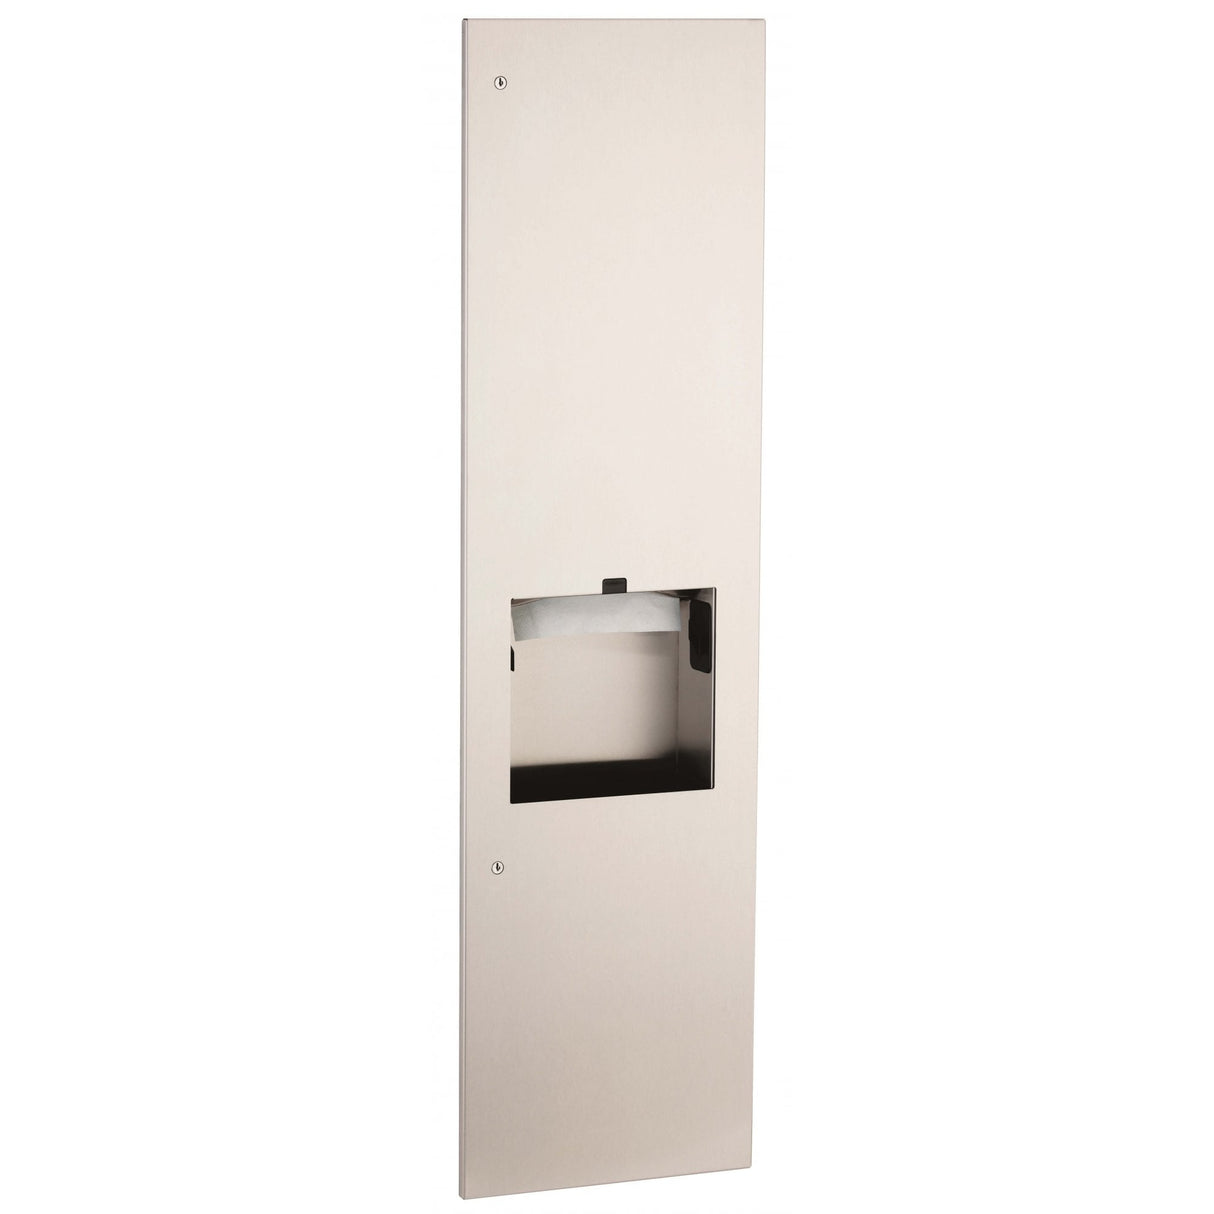 B-38030 Recessed 3 in 1 Hand Dryer Combination Unit